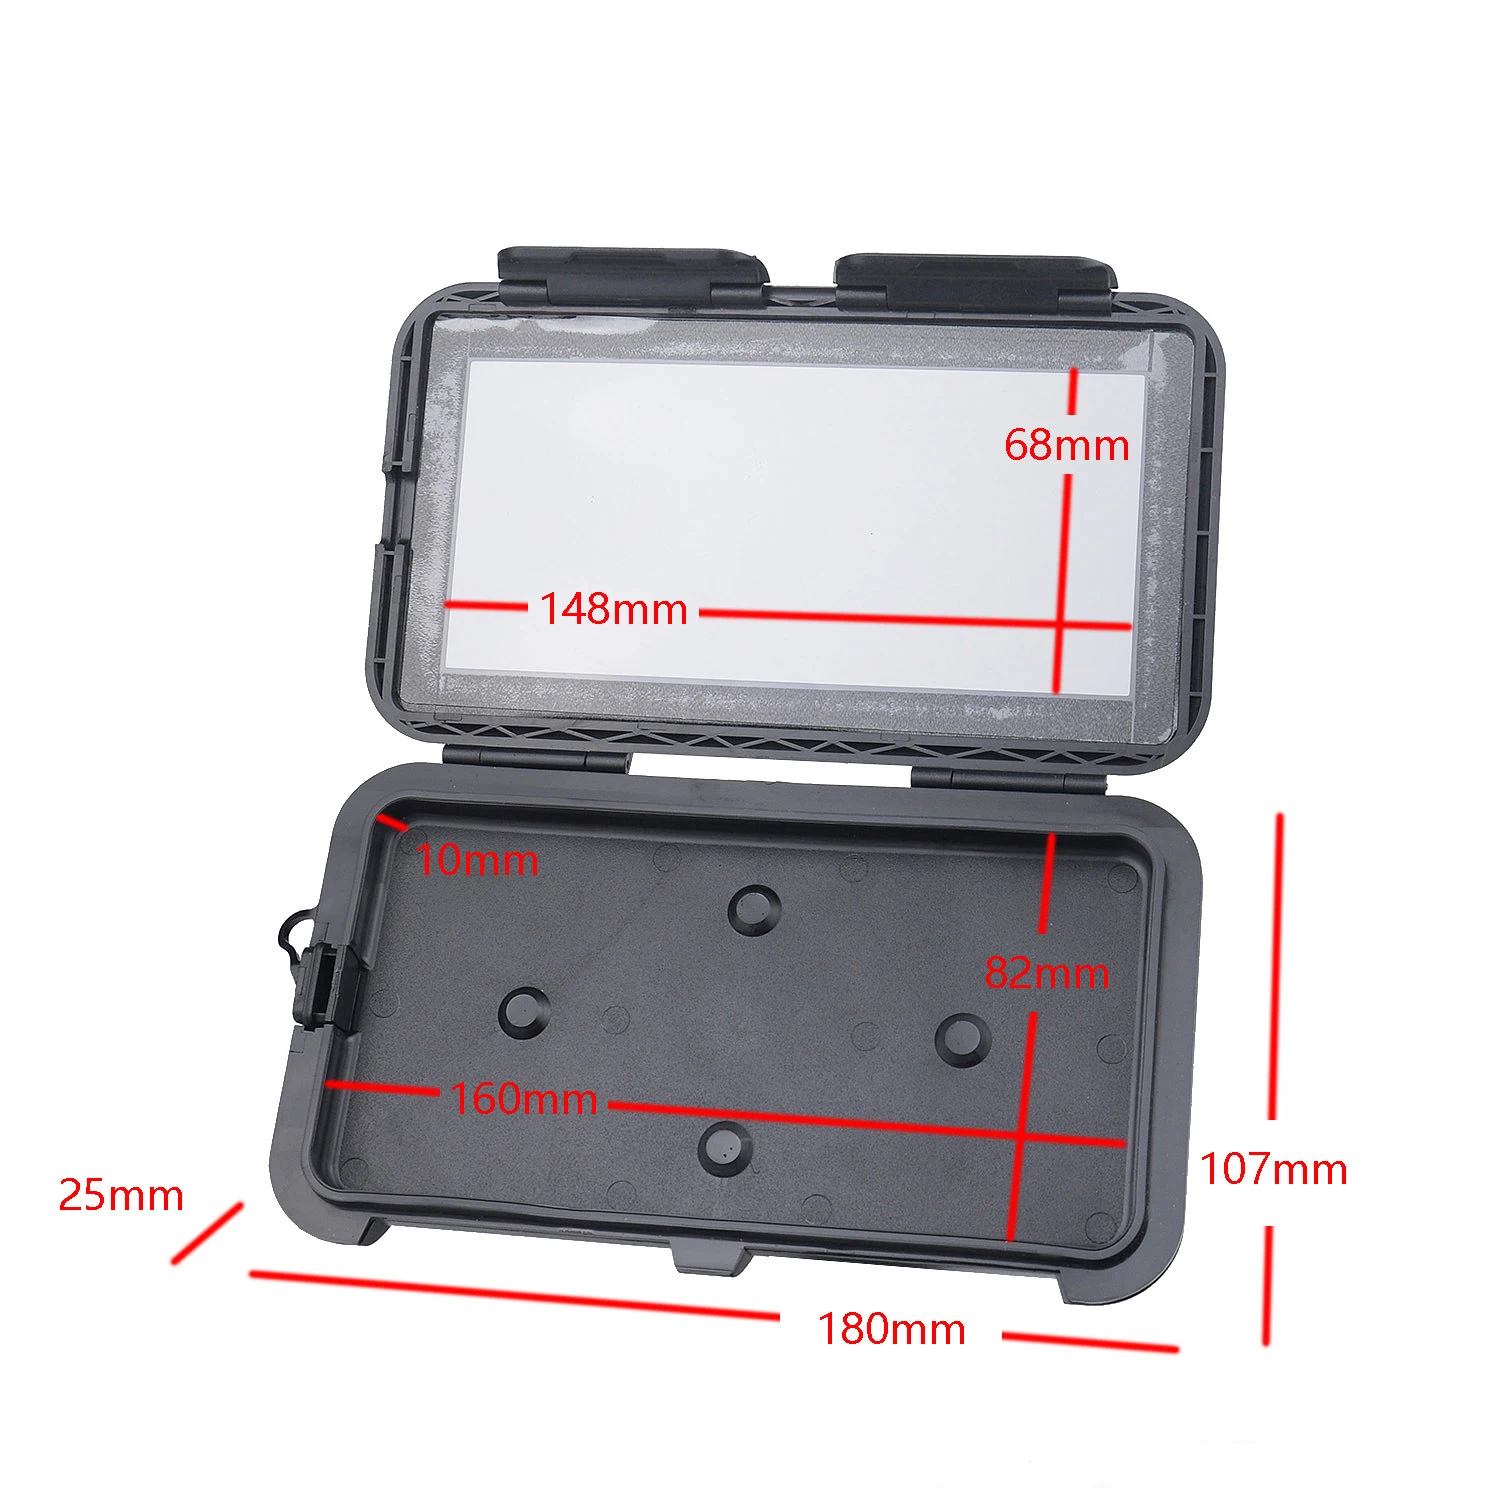 waterproof bicycle mobile phone holder motorcycle navigation support outdoor riding mobile phone waterproof case free global shipping